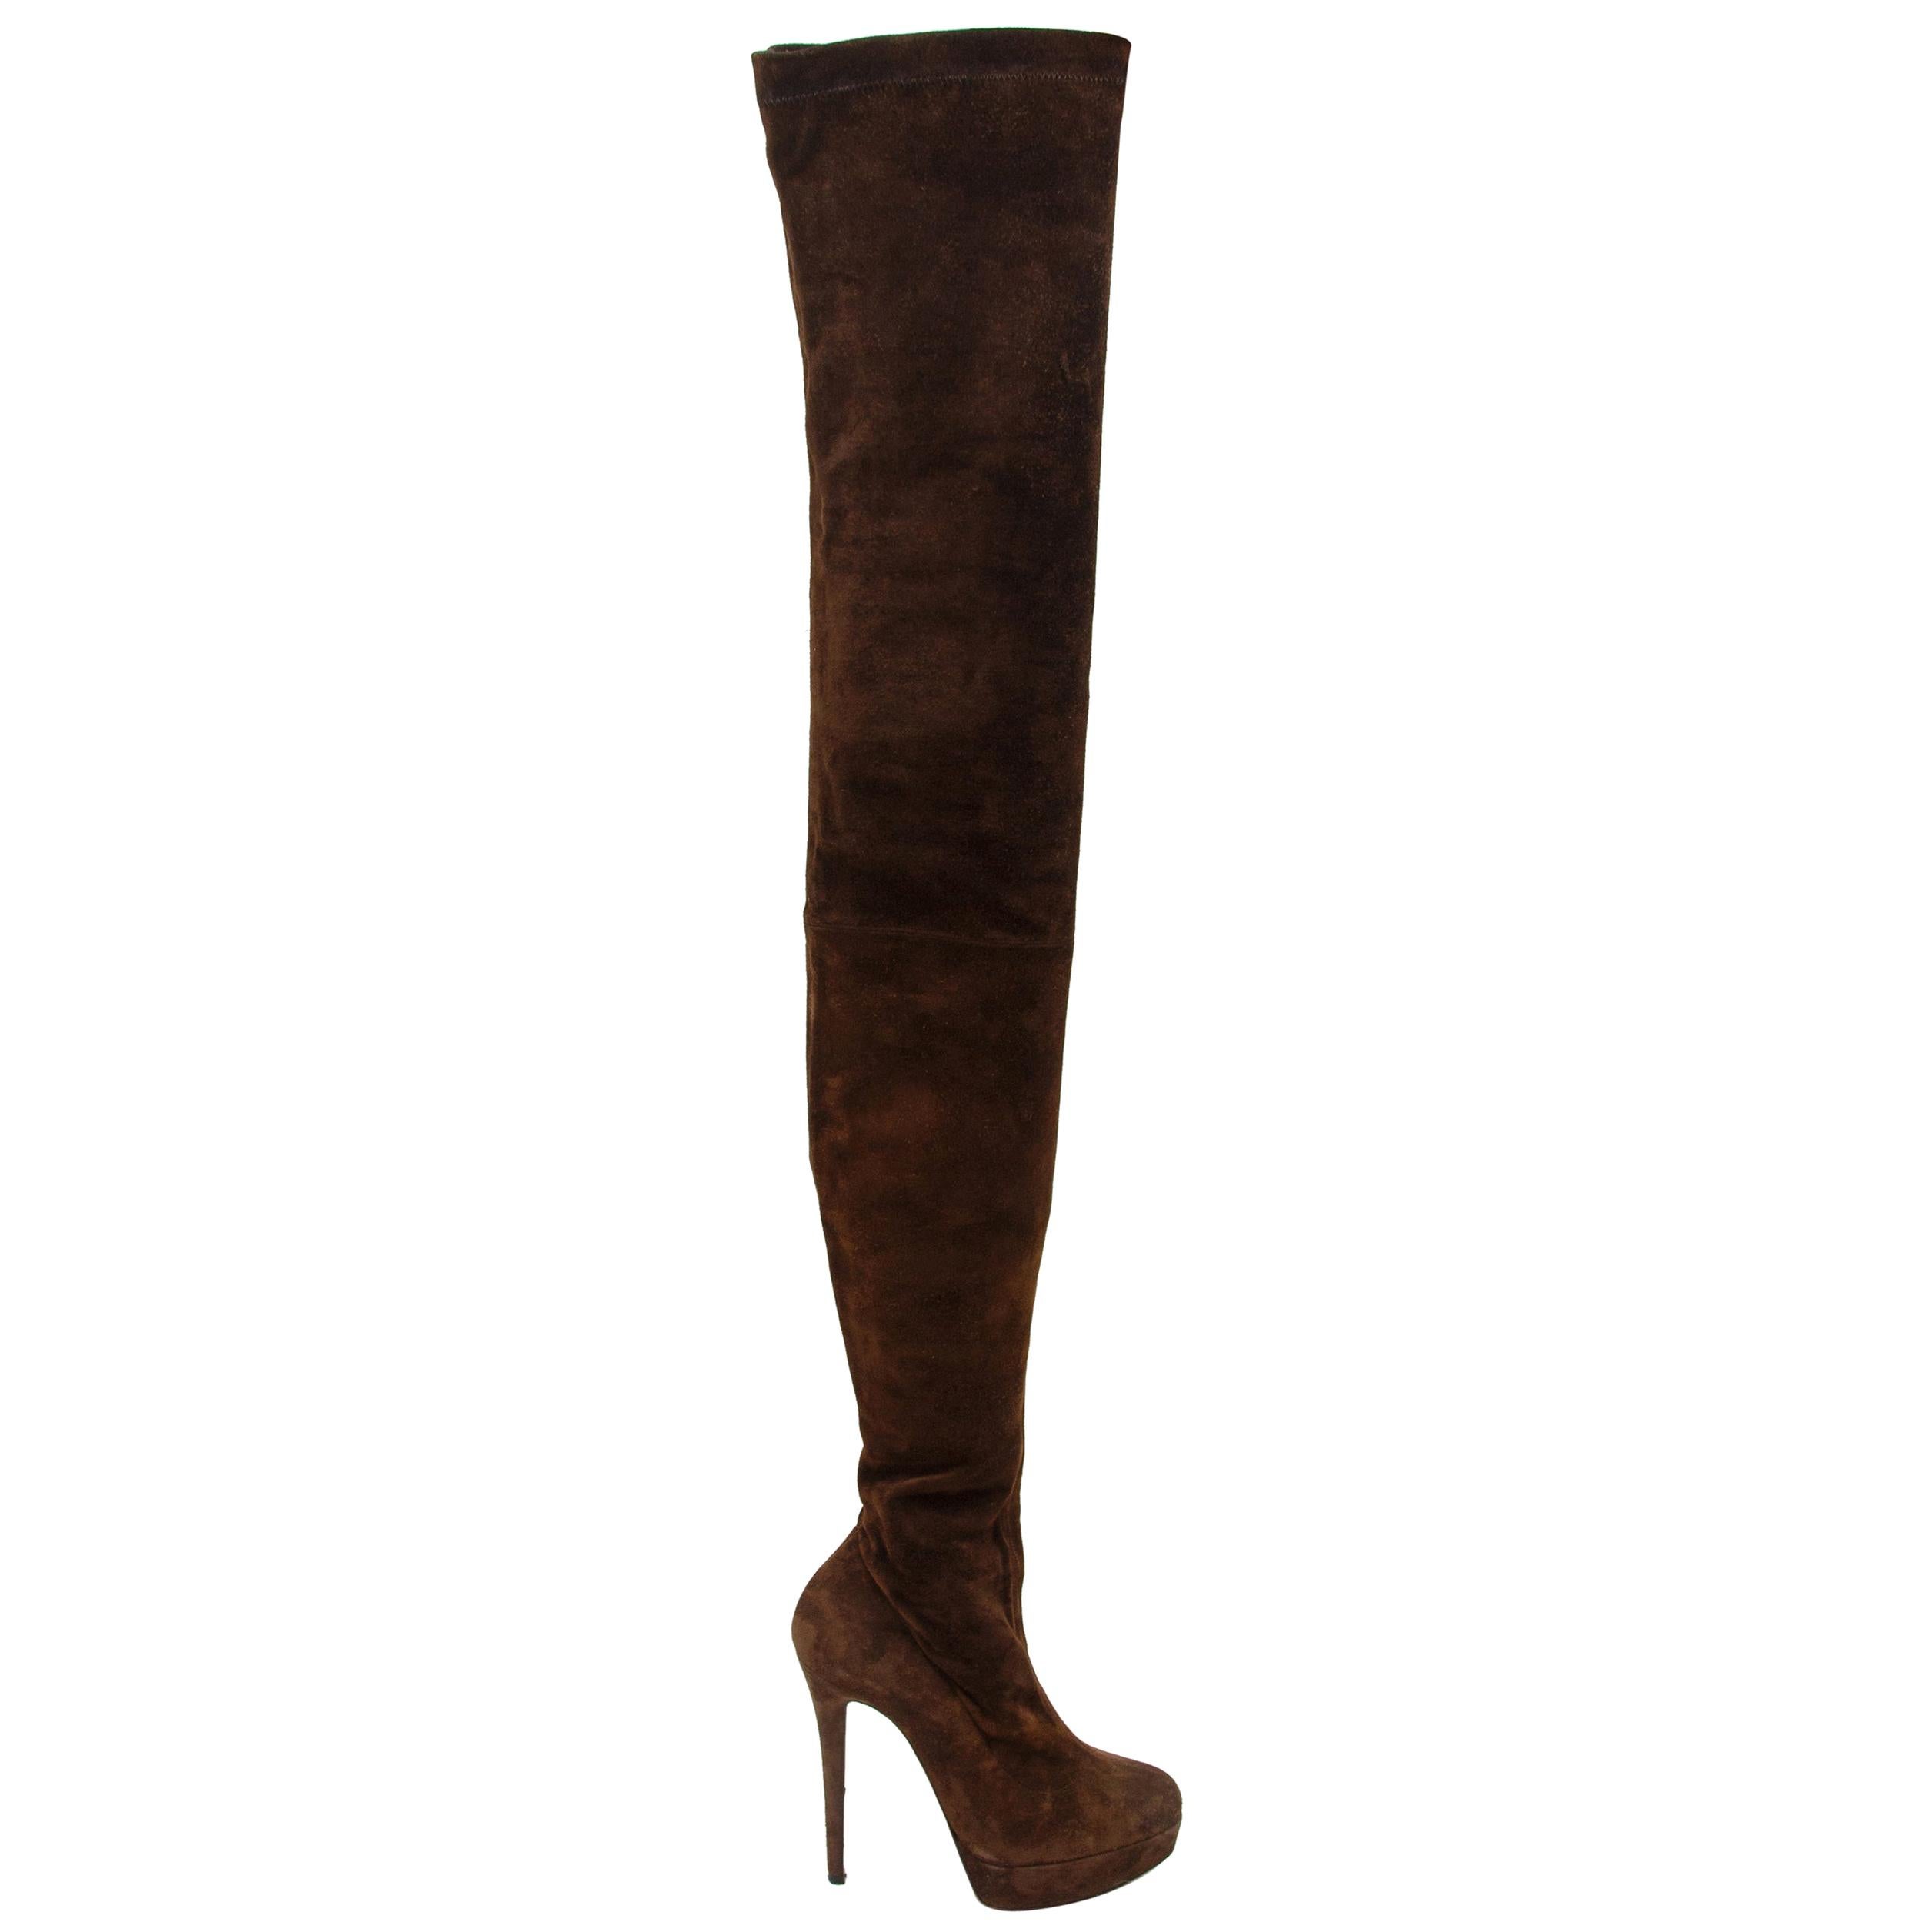 Christian Louboutin Brown Suede Over-The-Knee Boots